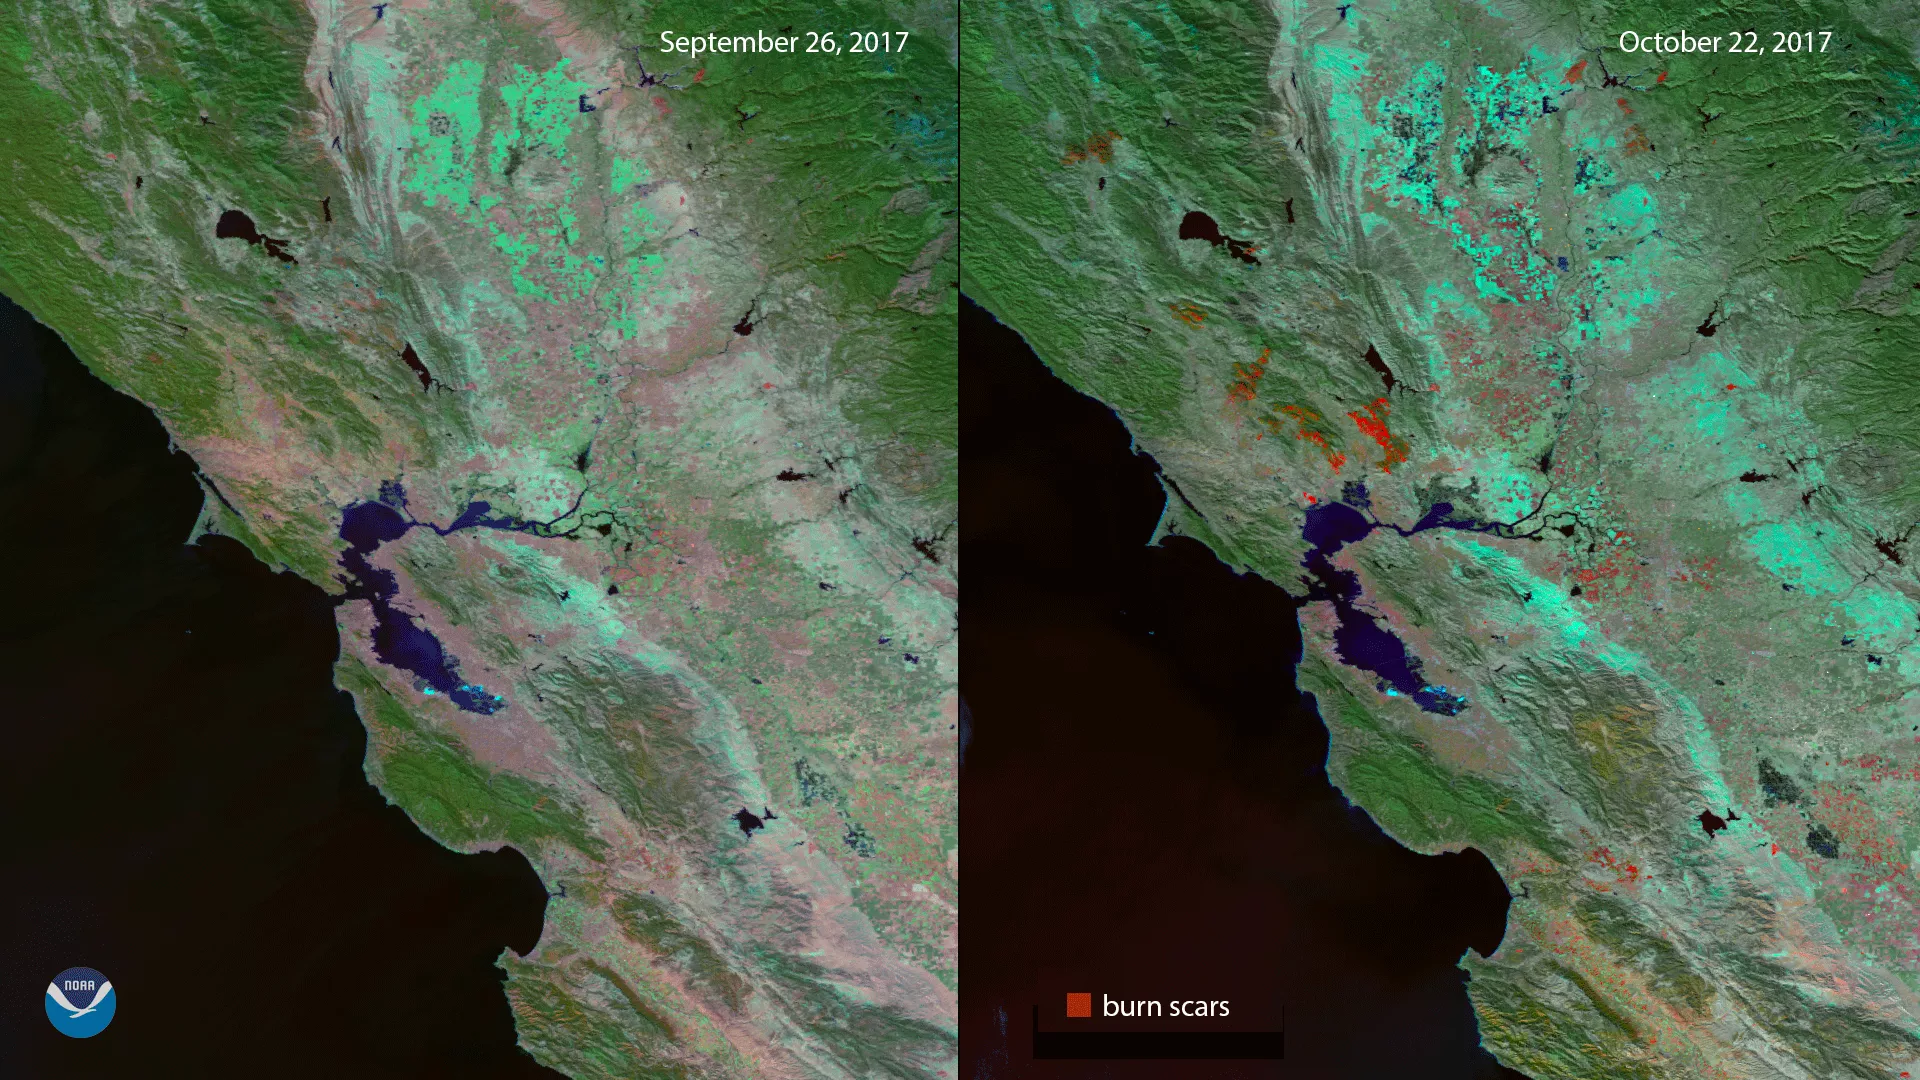 Side-by-side images of California from before and after wildfires. Burn scars can be seen in the second image.